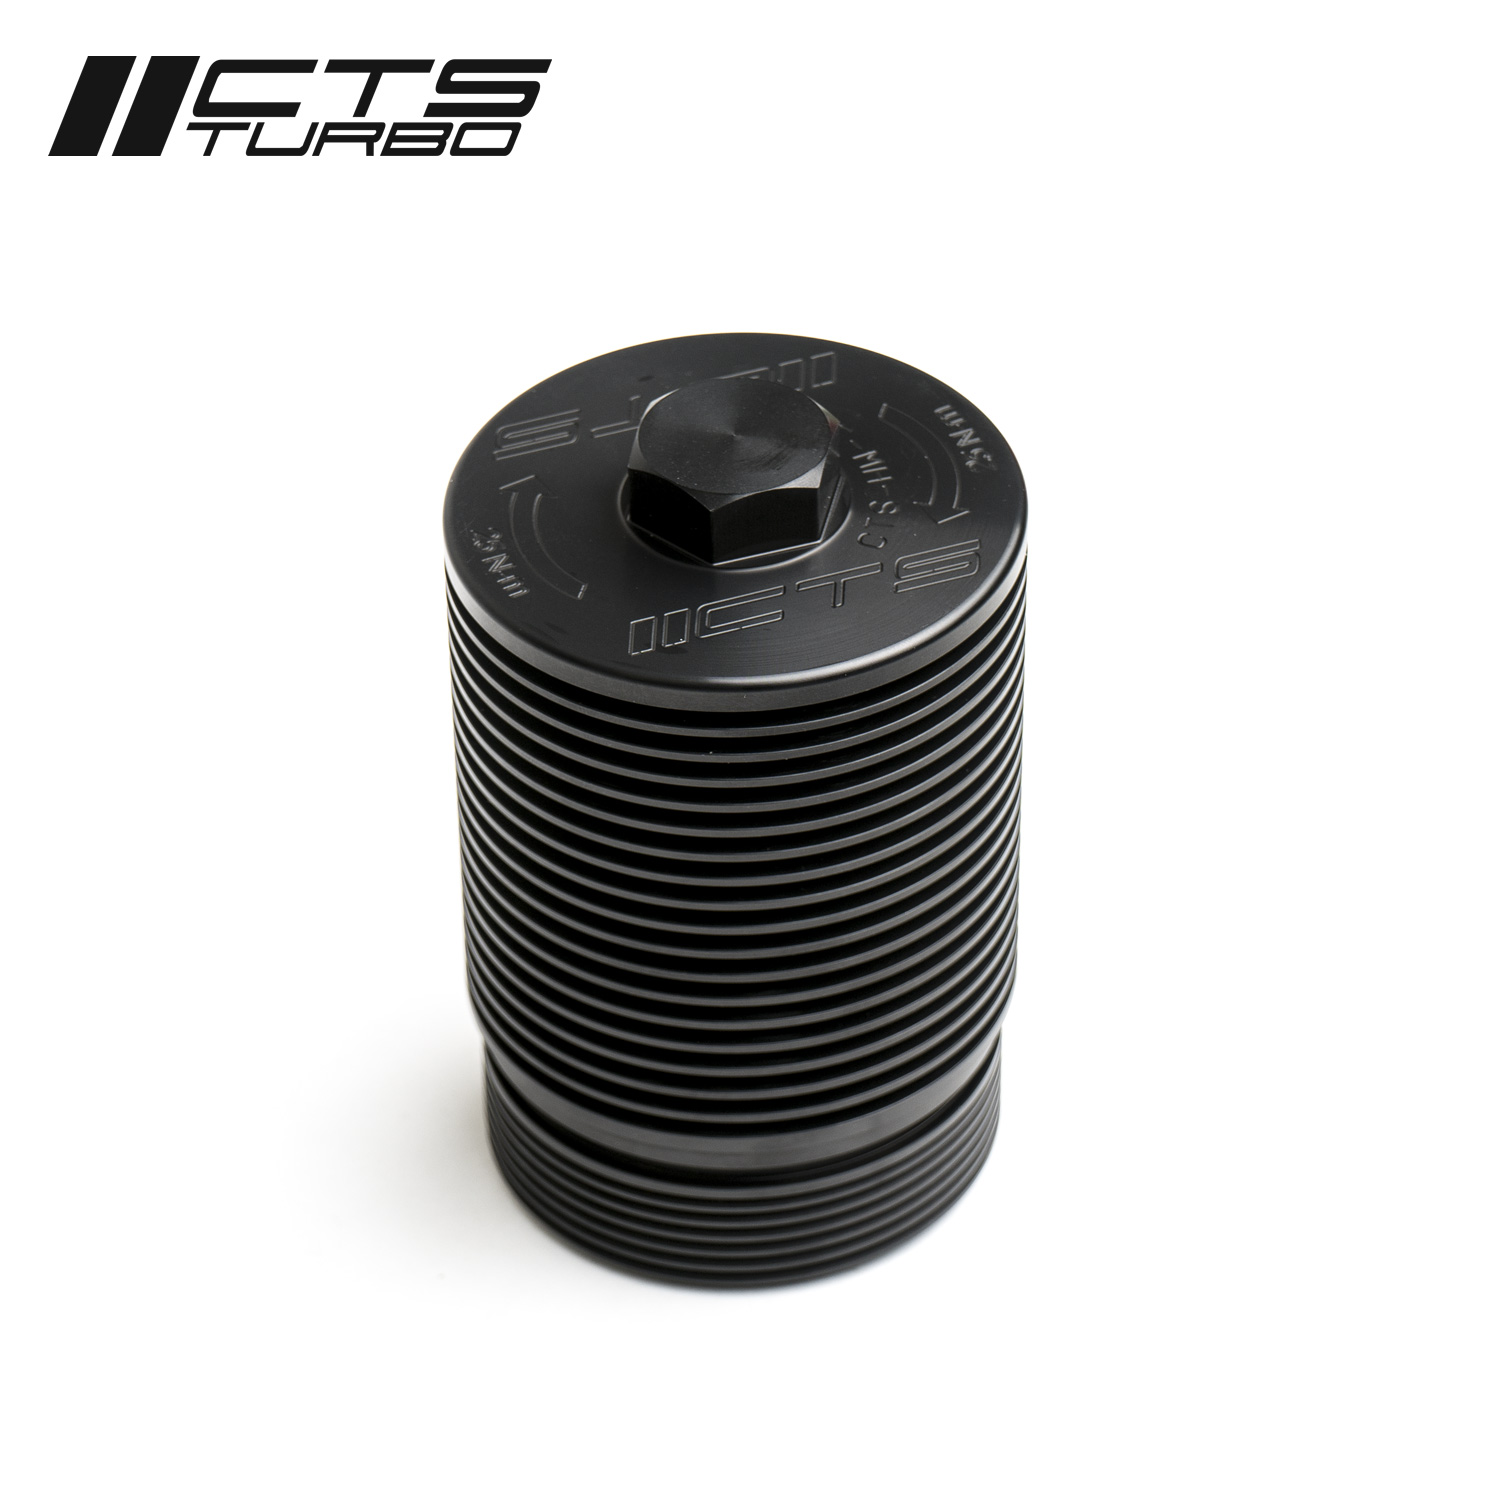 cts b cool dsg oil filter housing for mk7 5 golf r and audi s3 rs3 8v 2 audi ttrs 8s with 7 speed dsg dq381 and dq500 cts turbo cts b cool dsg oil filter housing for mk7 5 golf r and audi s3 rs3 8v 2 audi ttrs 8s with 7 speed dsg dq381 and dq500